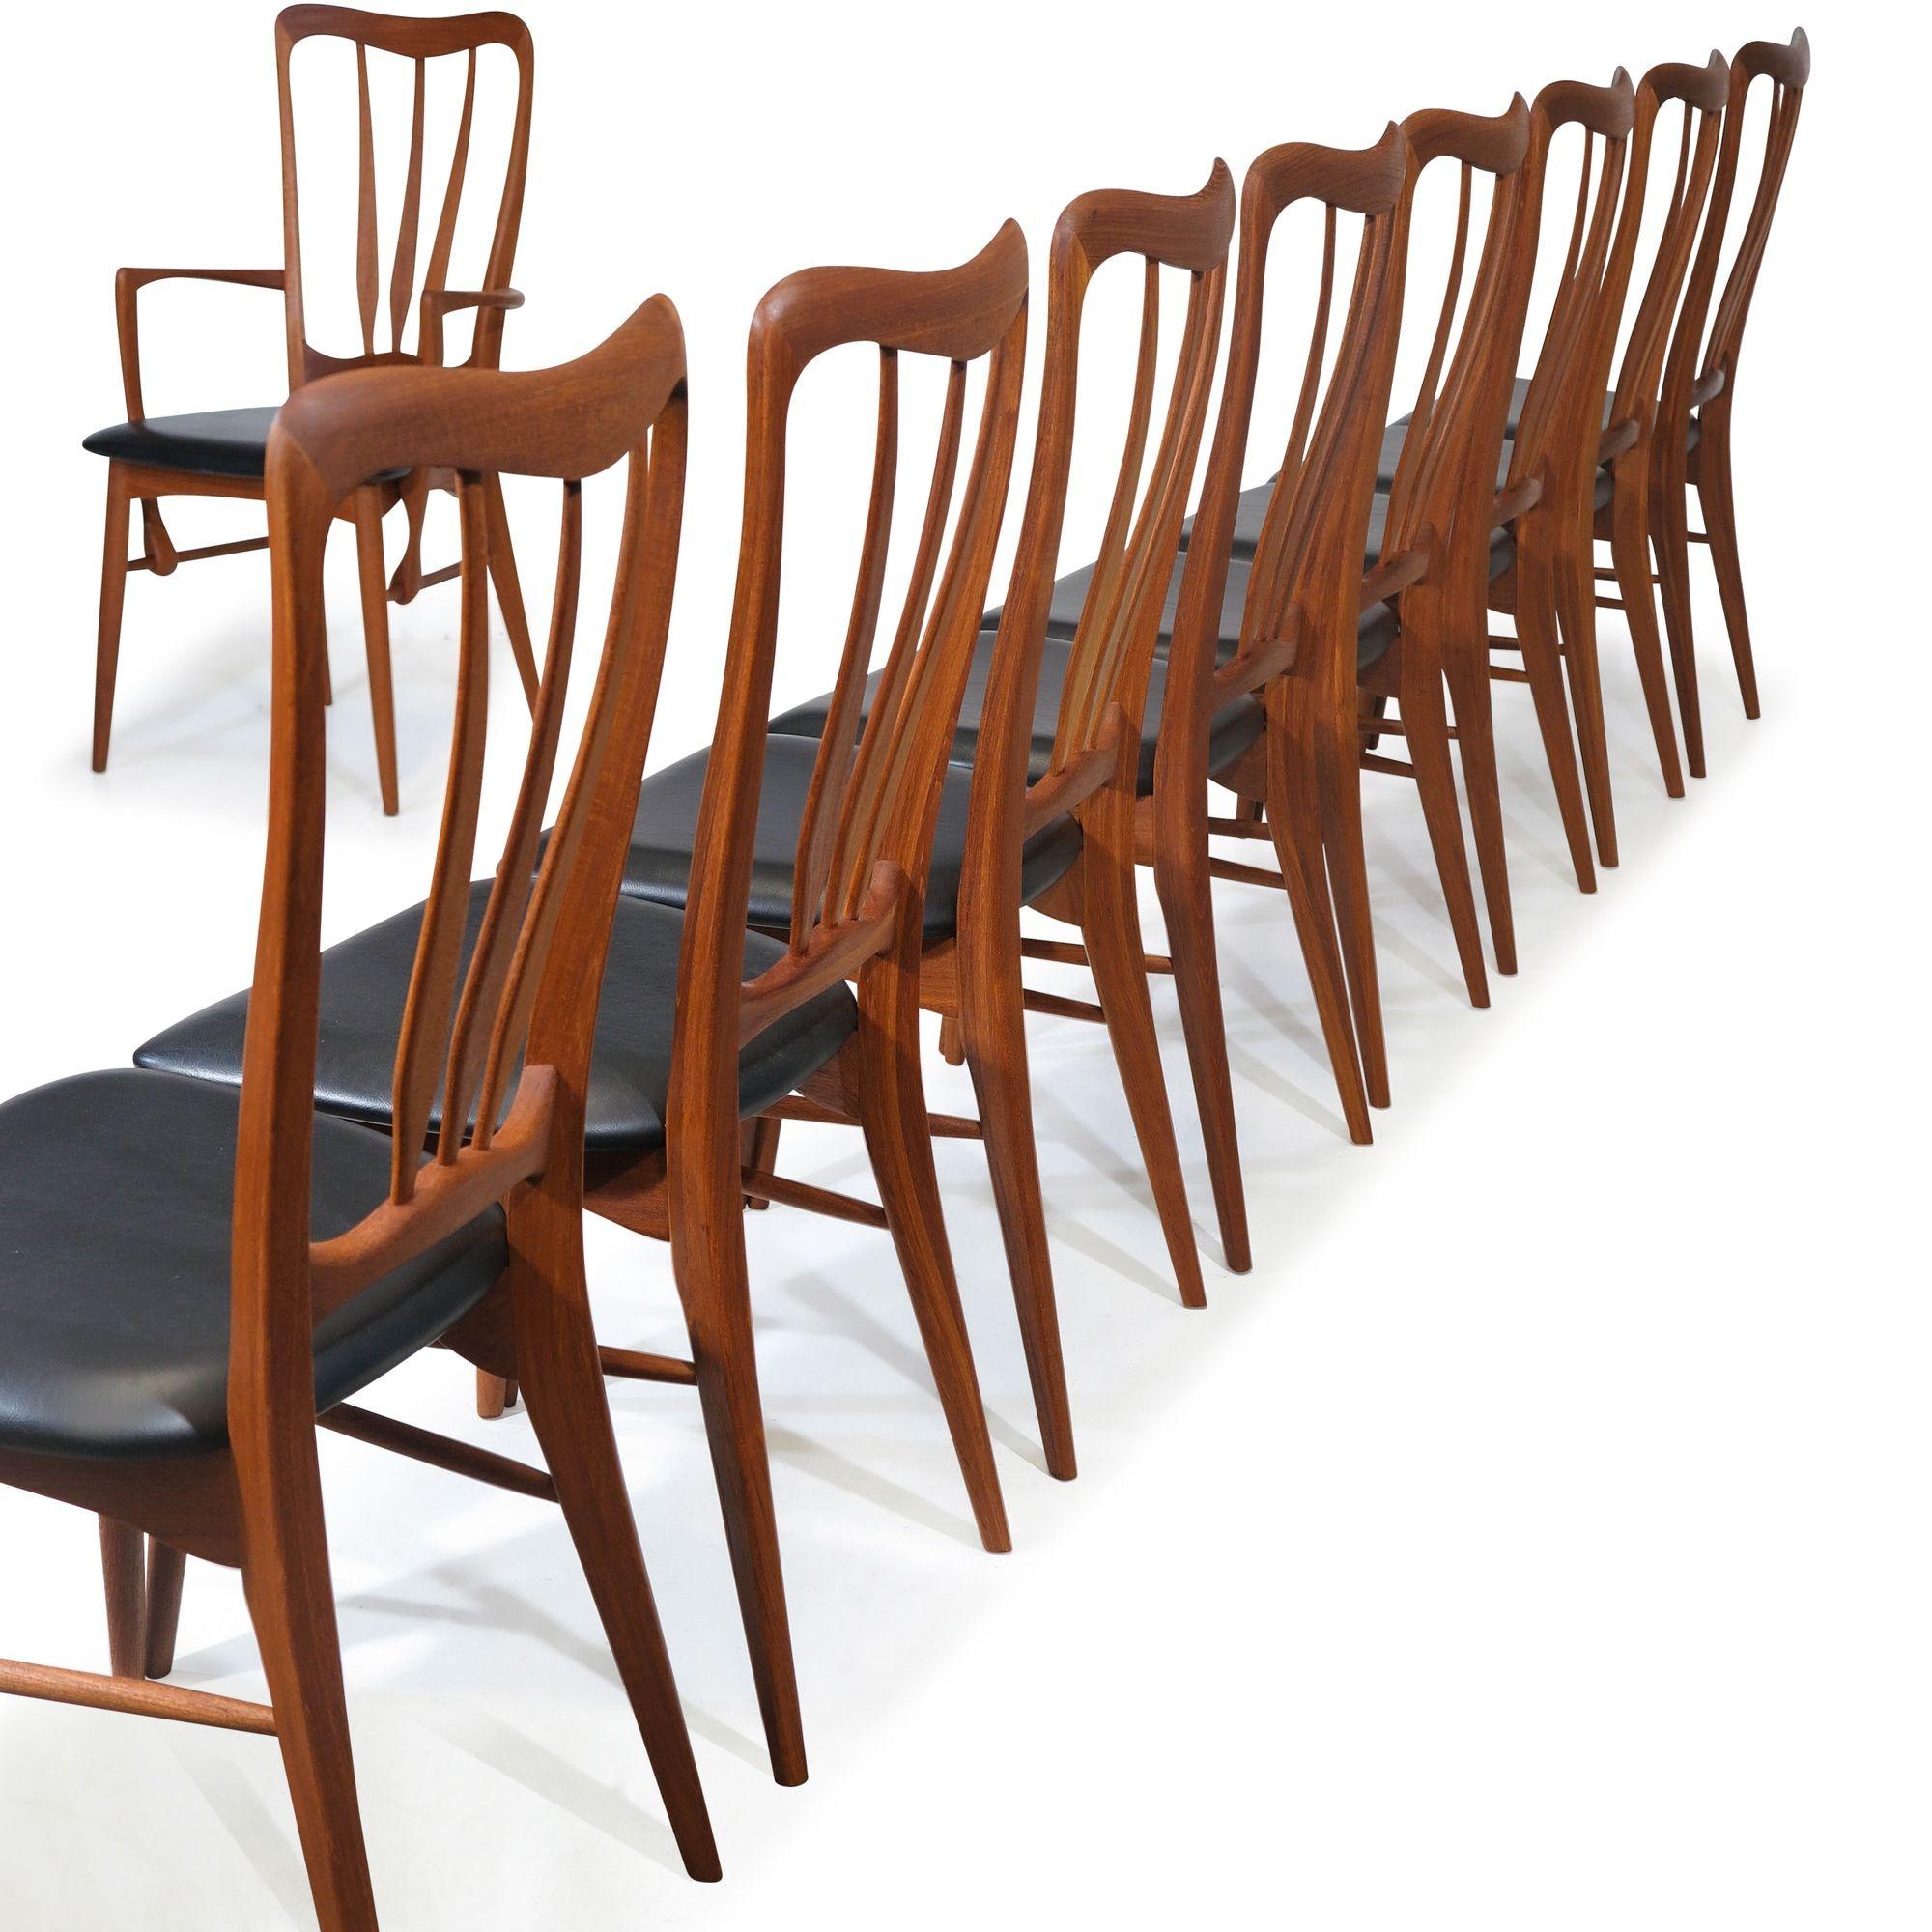 Set of 10 'Ingrid' dining chairs designed by Niels Koefoed for Koefoeds Hornslet, crafted of solid teak with a dramatic sculpted form. The elegant Scandinavian set includes eight side chairs and two armchairs, all with original black vinyl